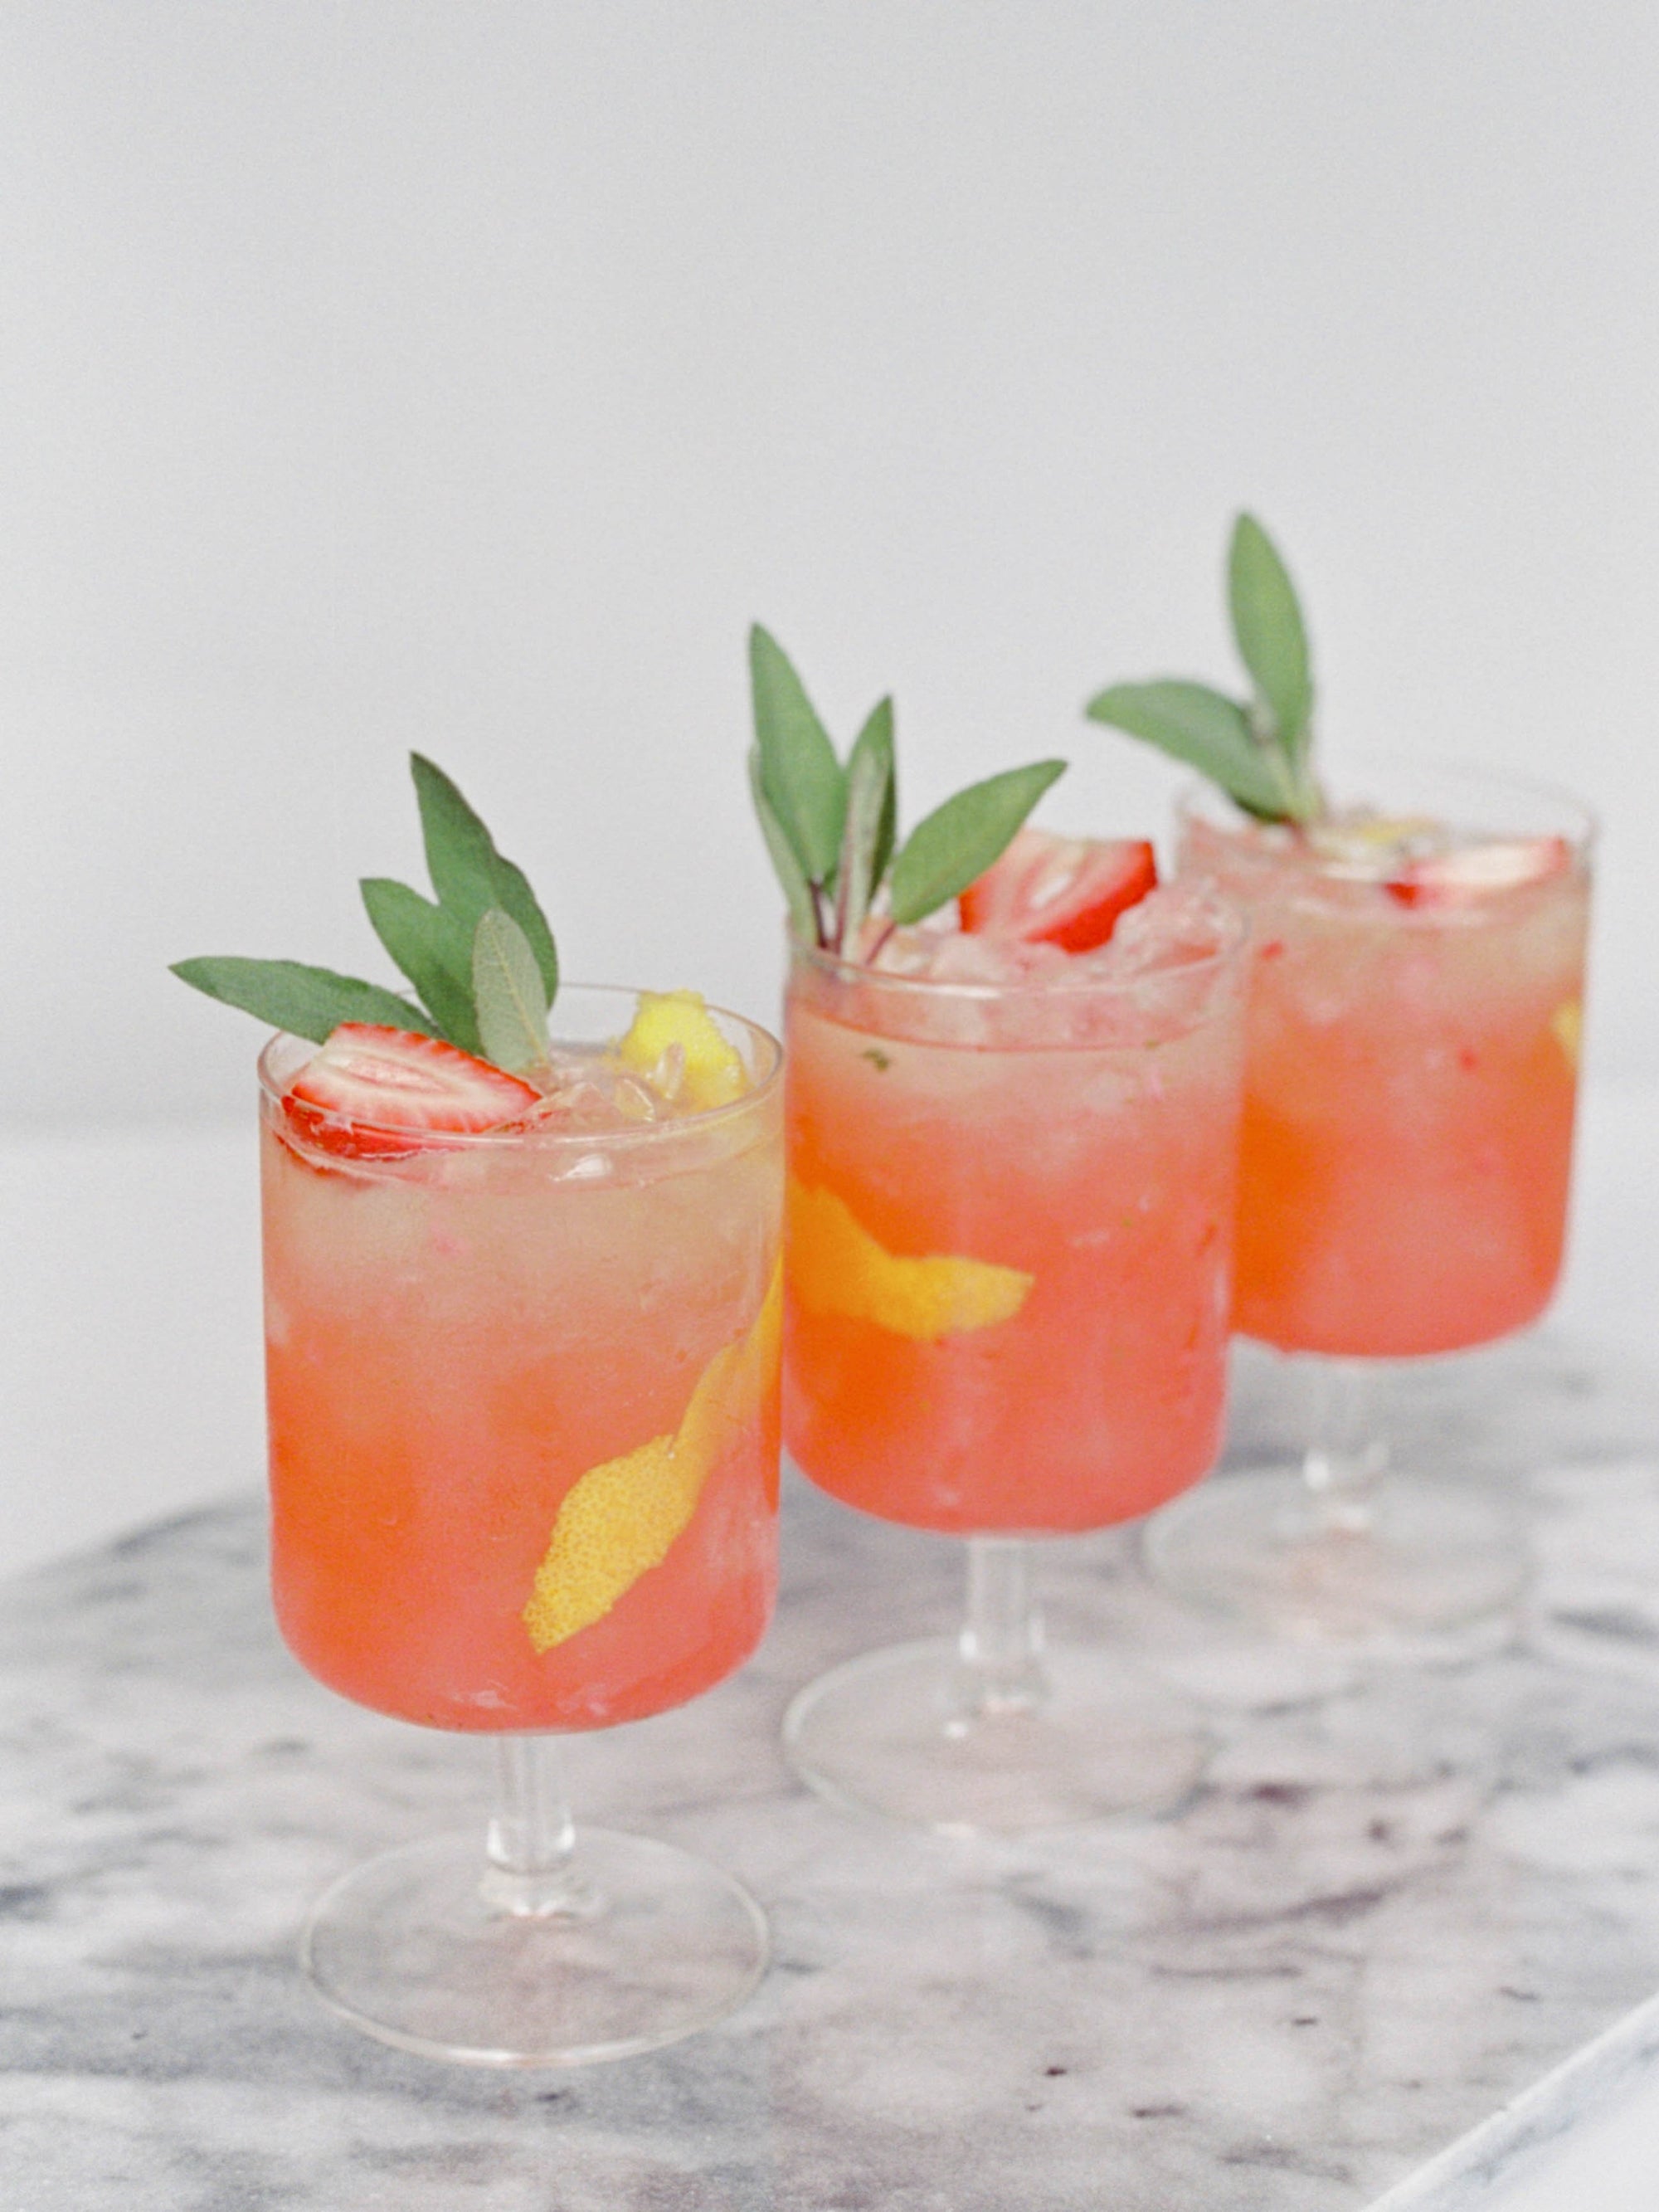 The Drink You’ll Crave All Summer: Strawberry, Rhubarb & Vanilla Collins